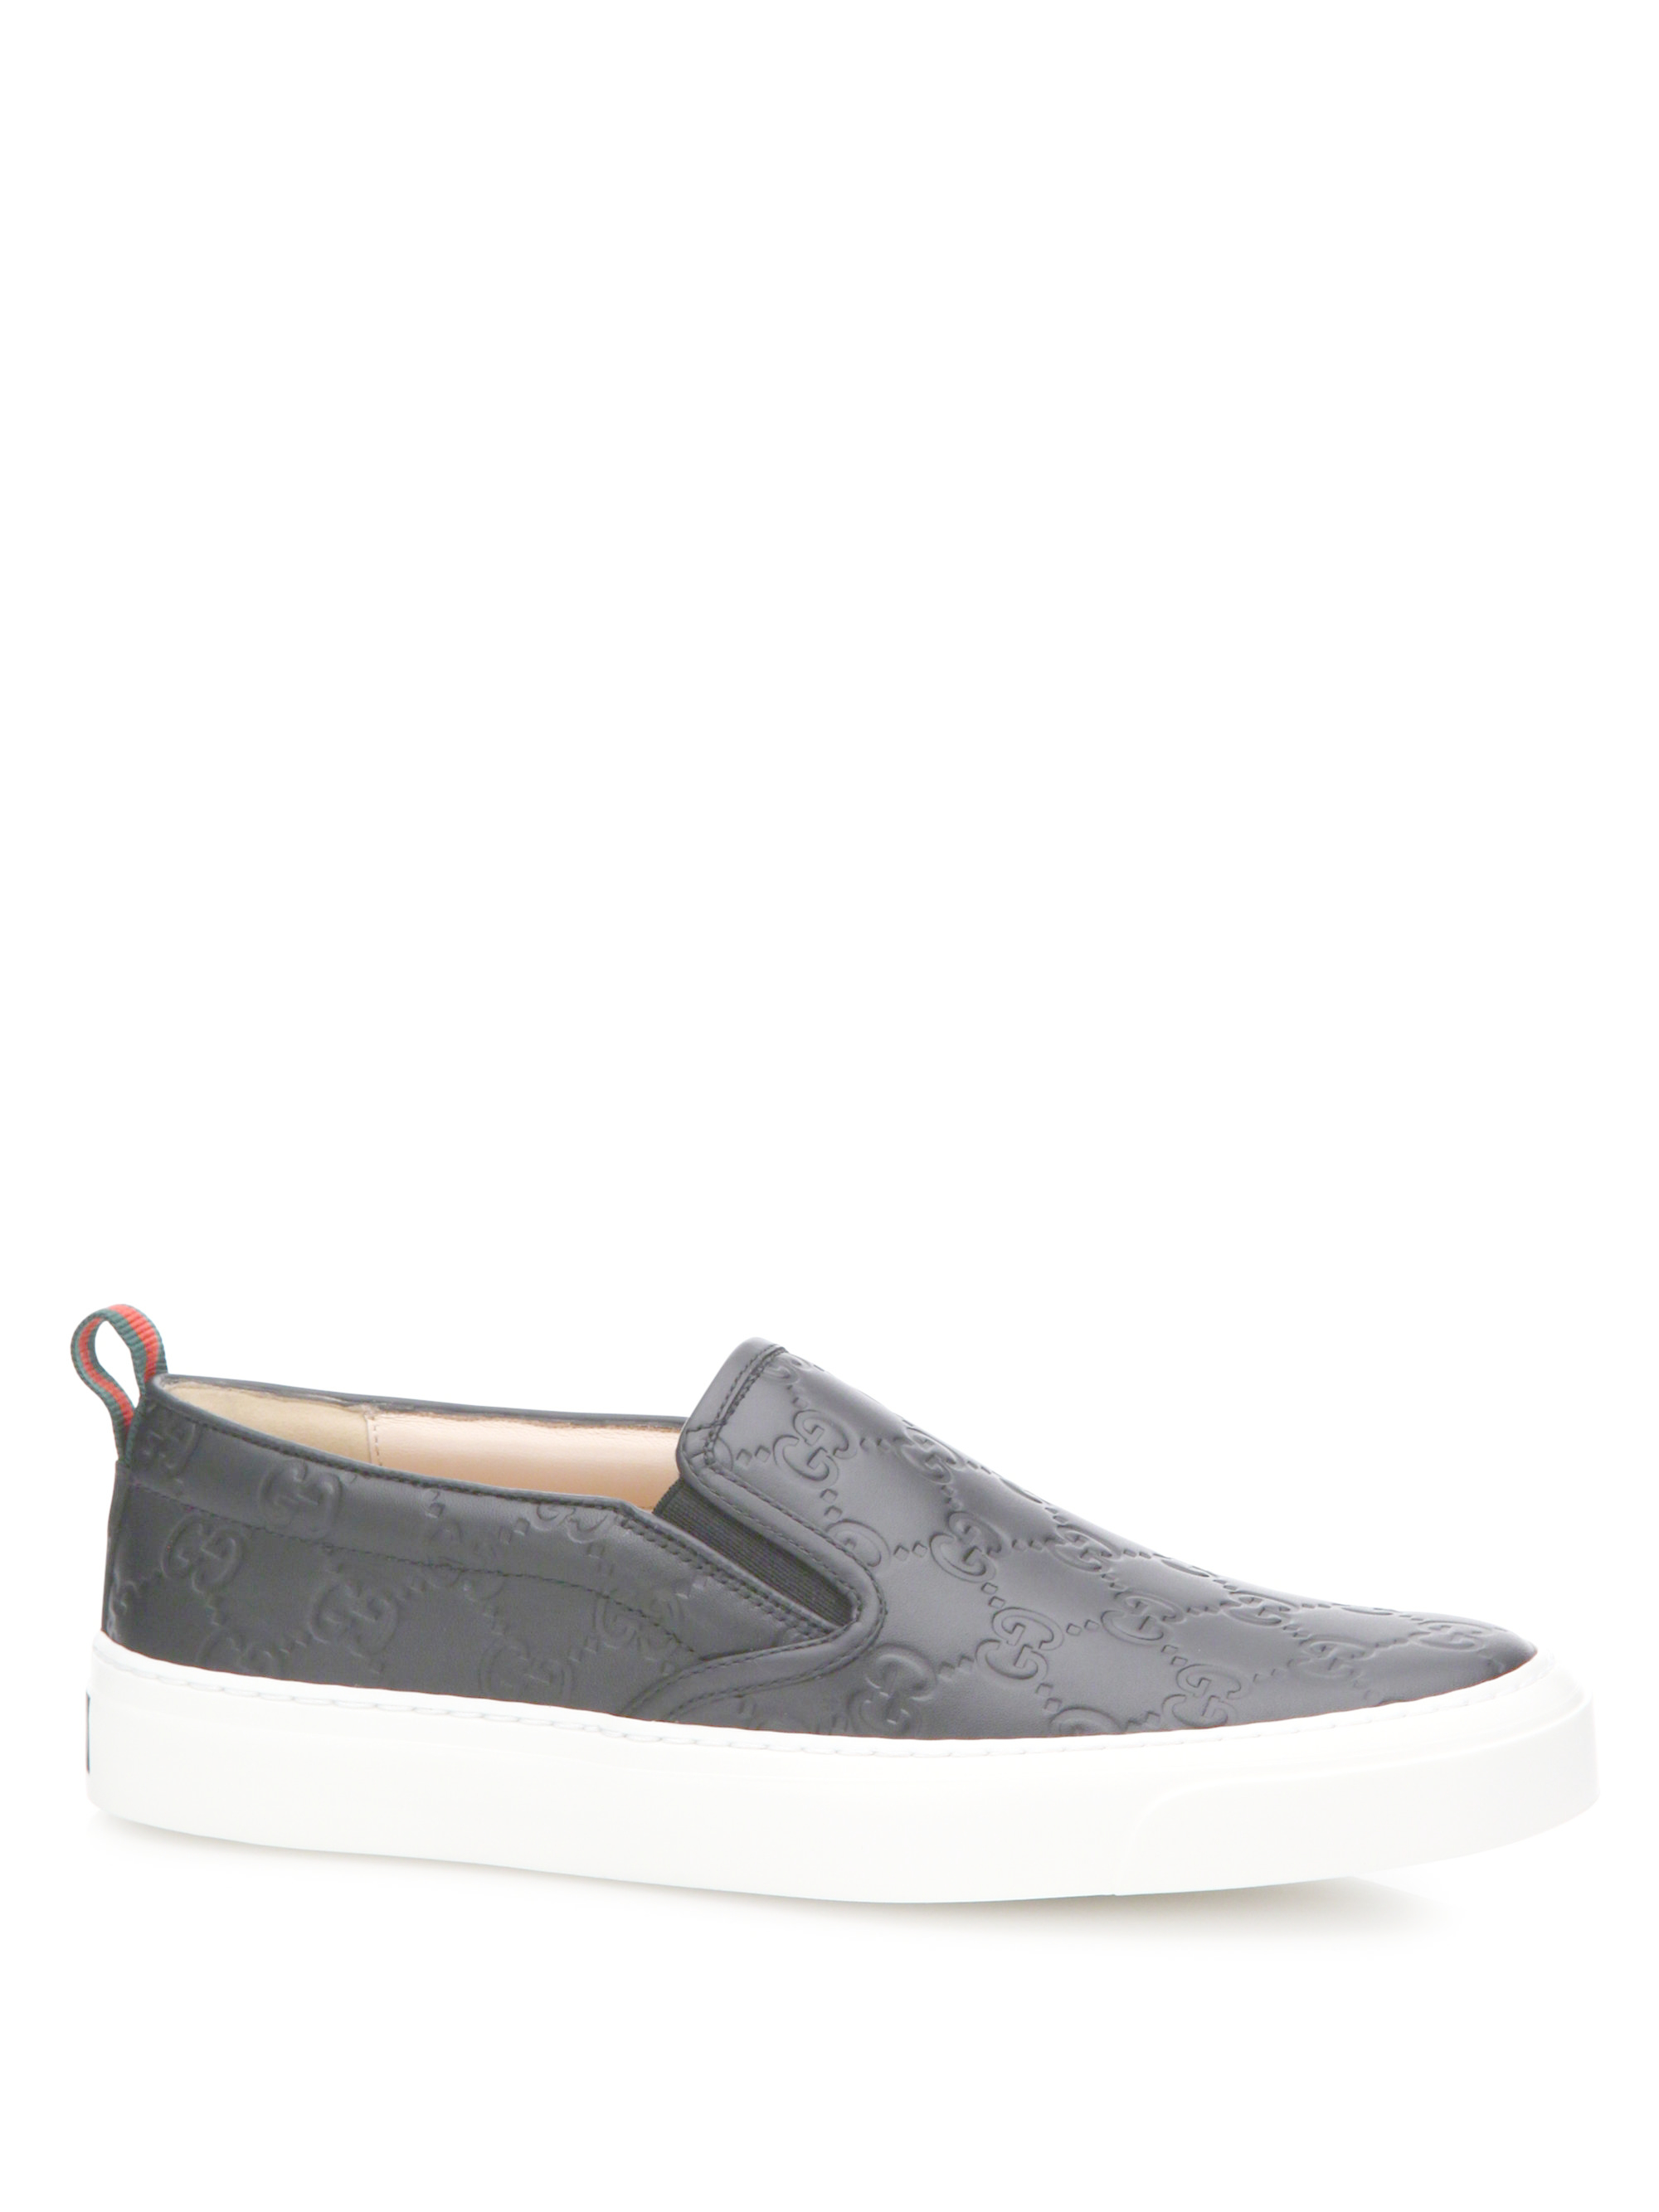 Gucci Board Gg Leather Skate Sneakers in Gray | Lyst